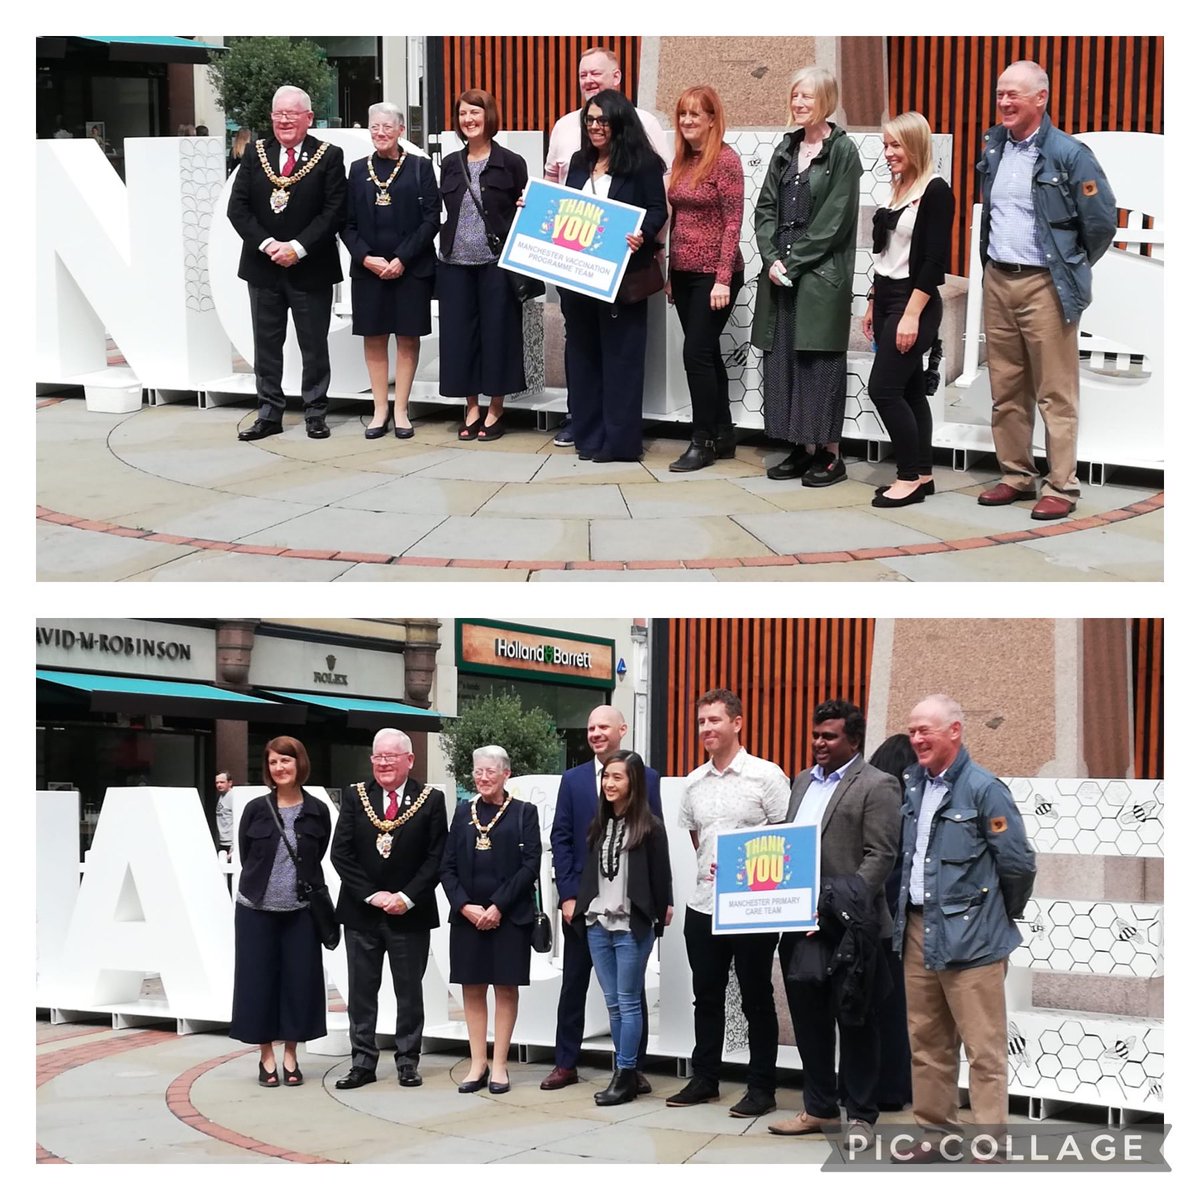 Lovely to be in the heart of the city to say “ Thank you “with all the teams Emotional to remember the hard times as well as the celebration of resilience and looking to the future ⁦@MHCCPrimaryCare⁩ ⁦@ManCityCouncil⁩ #Covidvaccine ⁦@TeamGP⁩